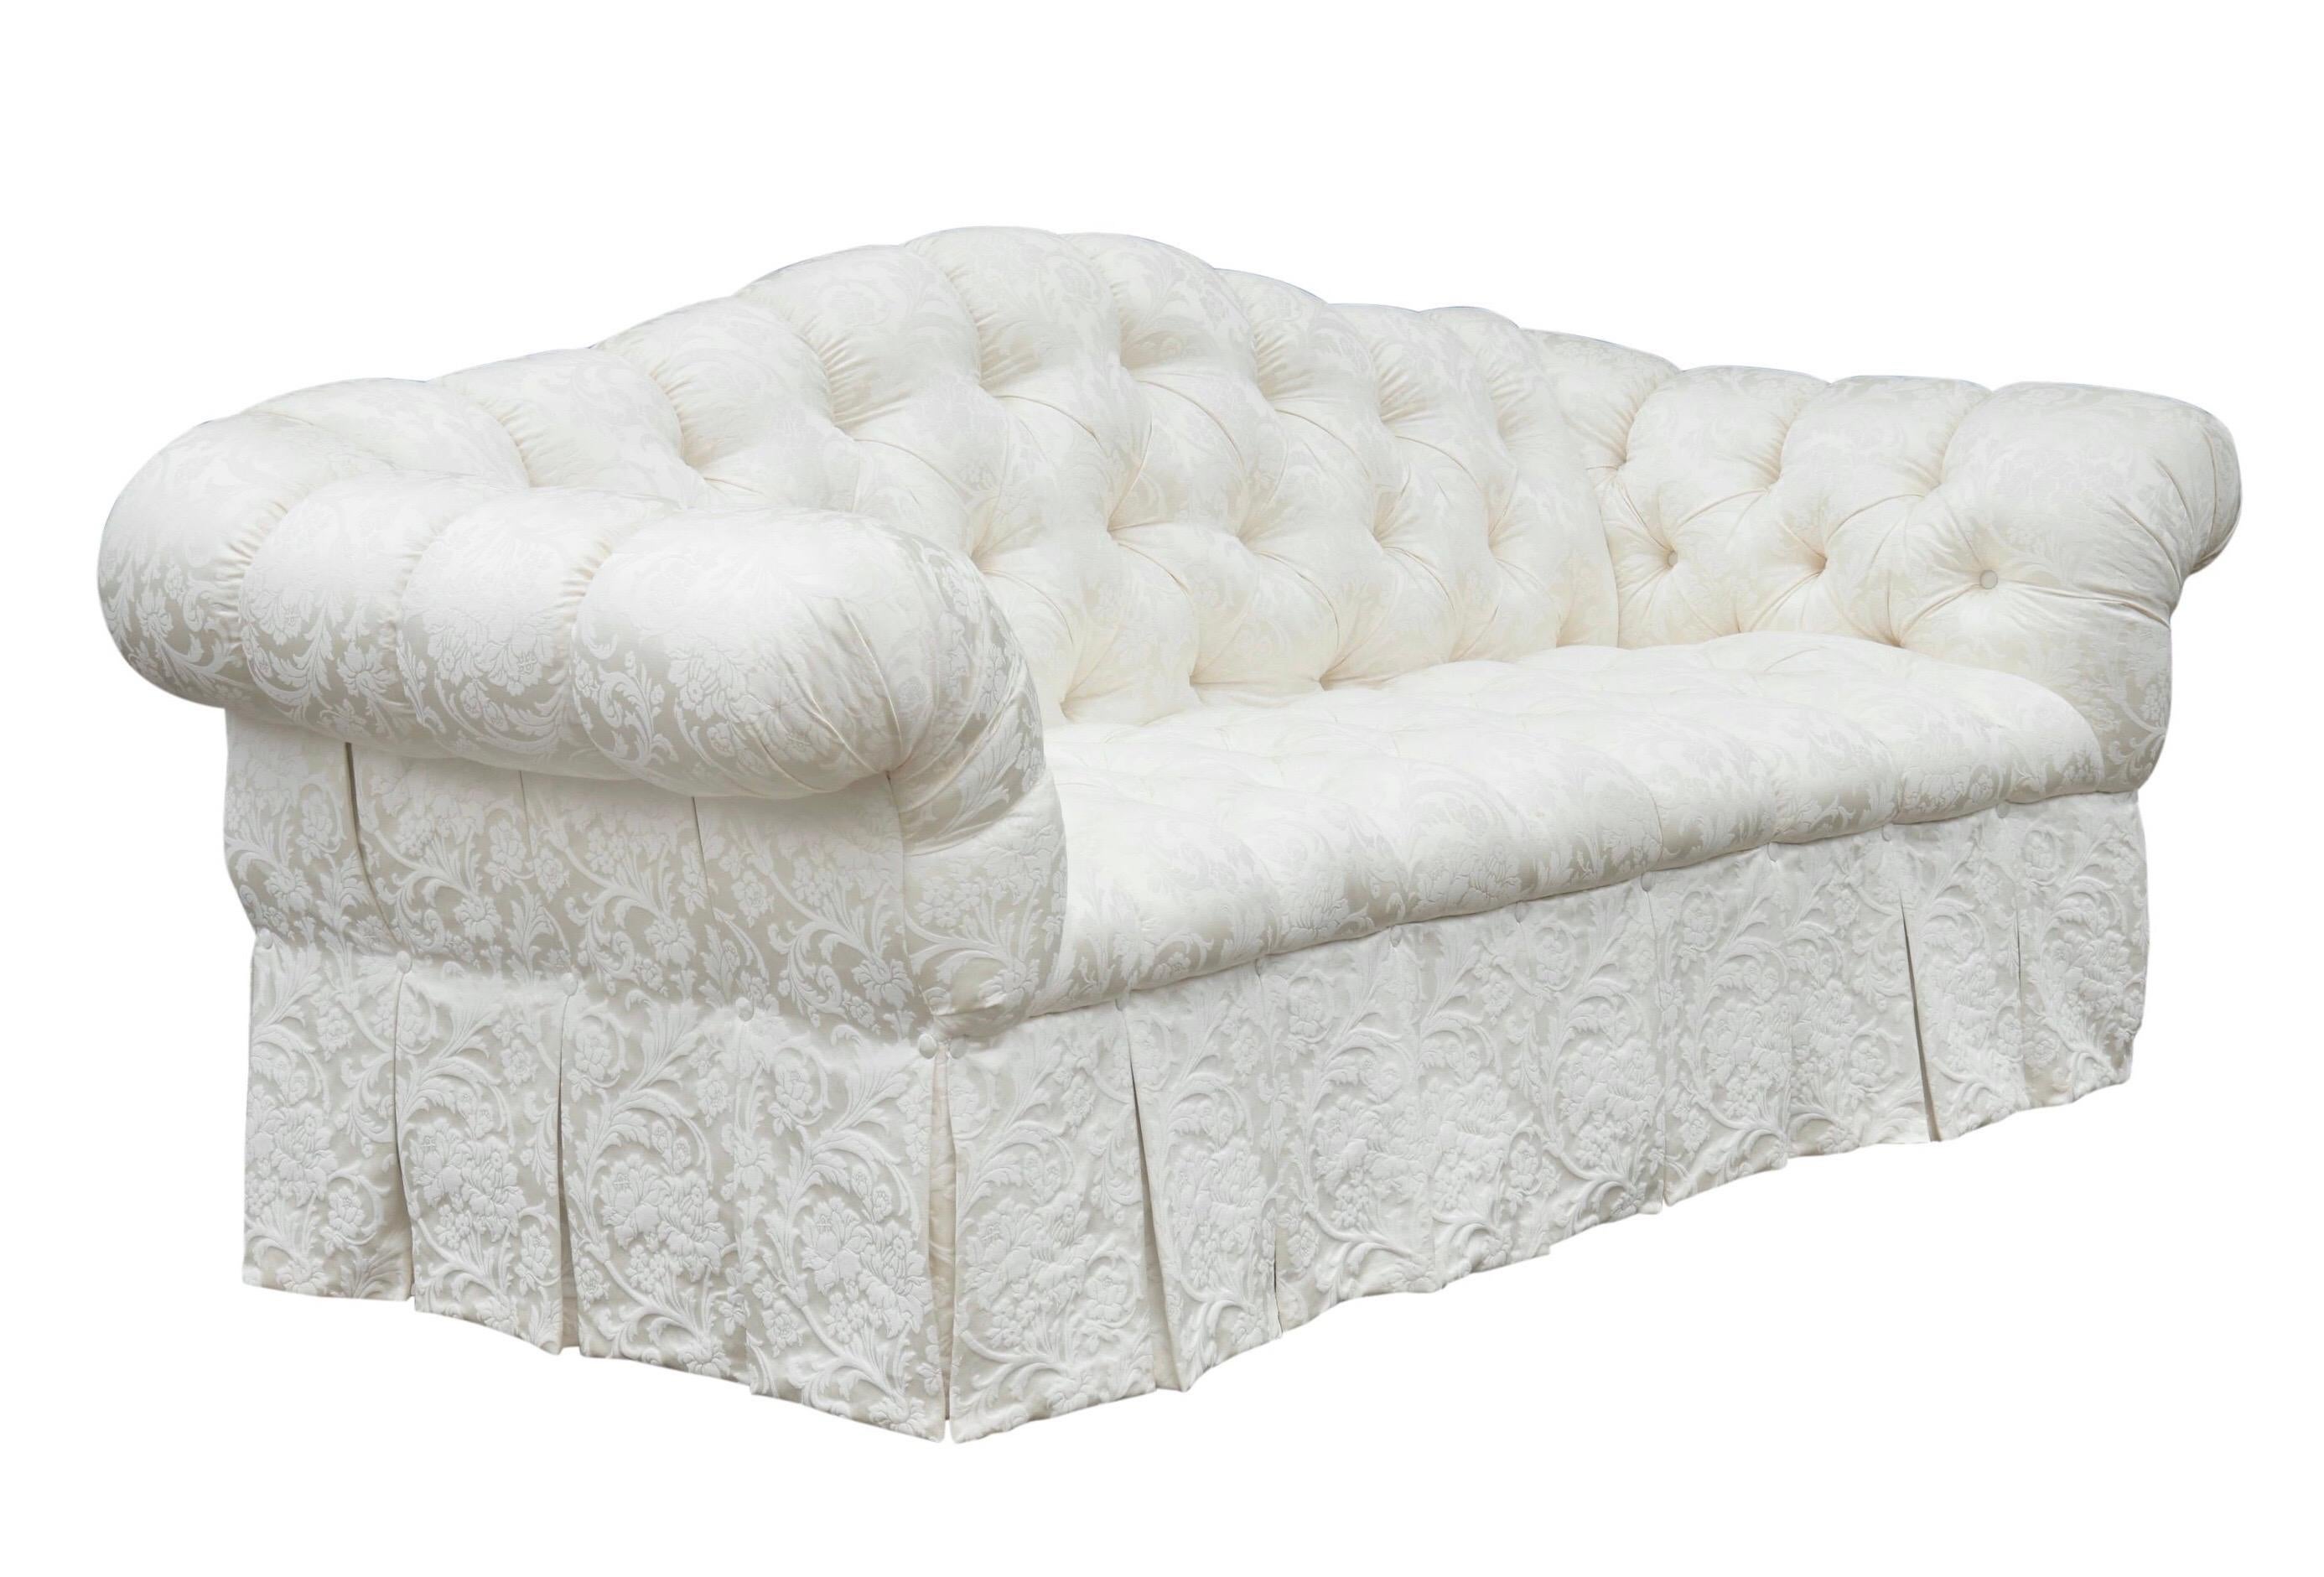 A traditional tufted camel back sofa made by Harrod’s of London. Upholstered in an elegant ivory damask with diamond button tufting and pleated rolled arms. The front is finished with a box pleated skirt and the back and sides are decorated with